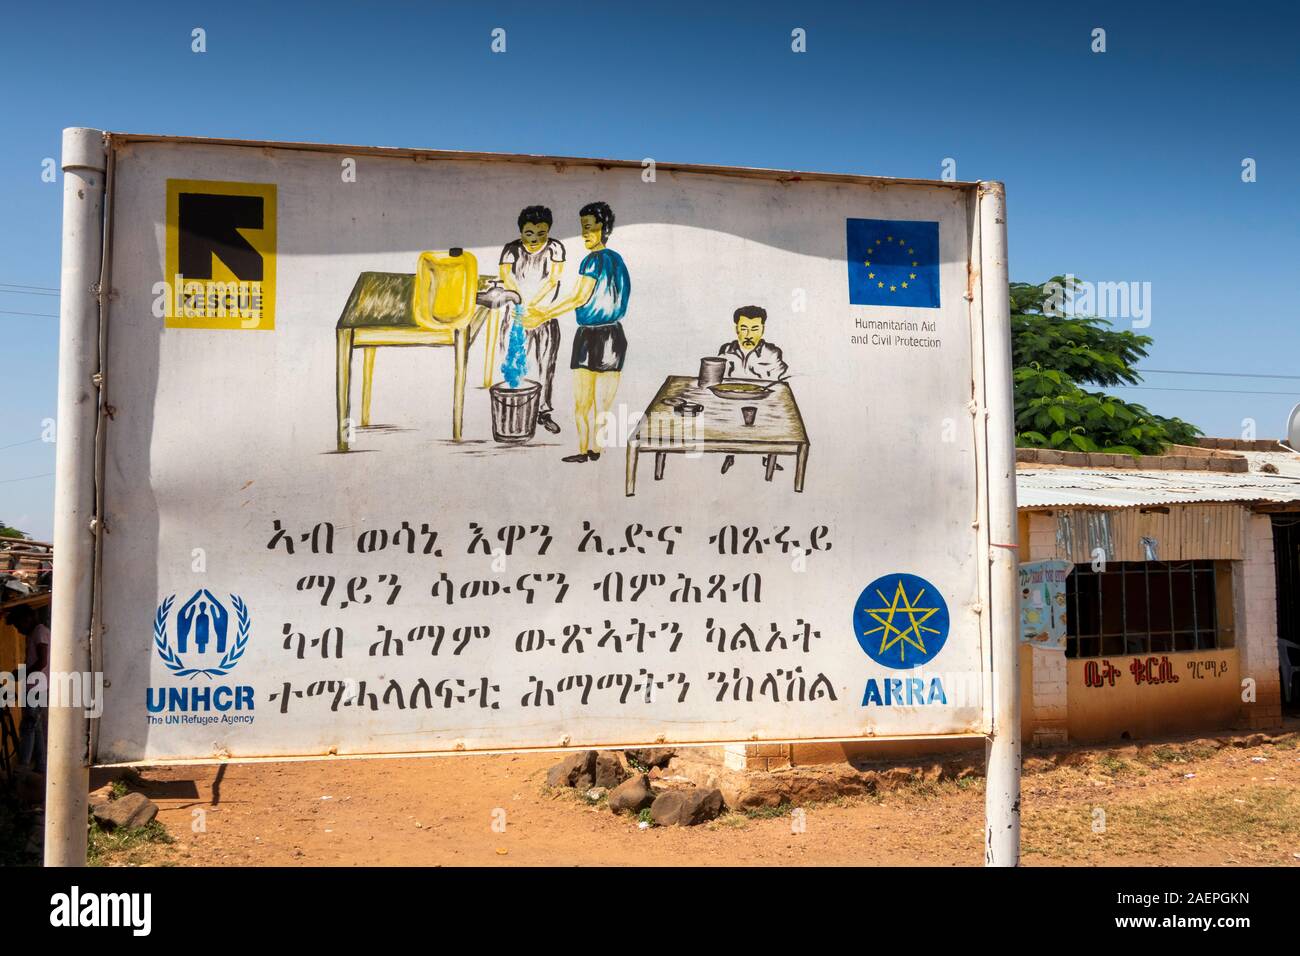 Ethiopia, Tigray, Mainai, Eritrean refugee village, UNHCR, ARRA, International Rescue Committee and United Nations Humanitarian Aid and Civil protecti Stock Photo